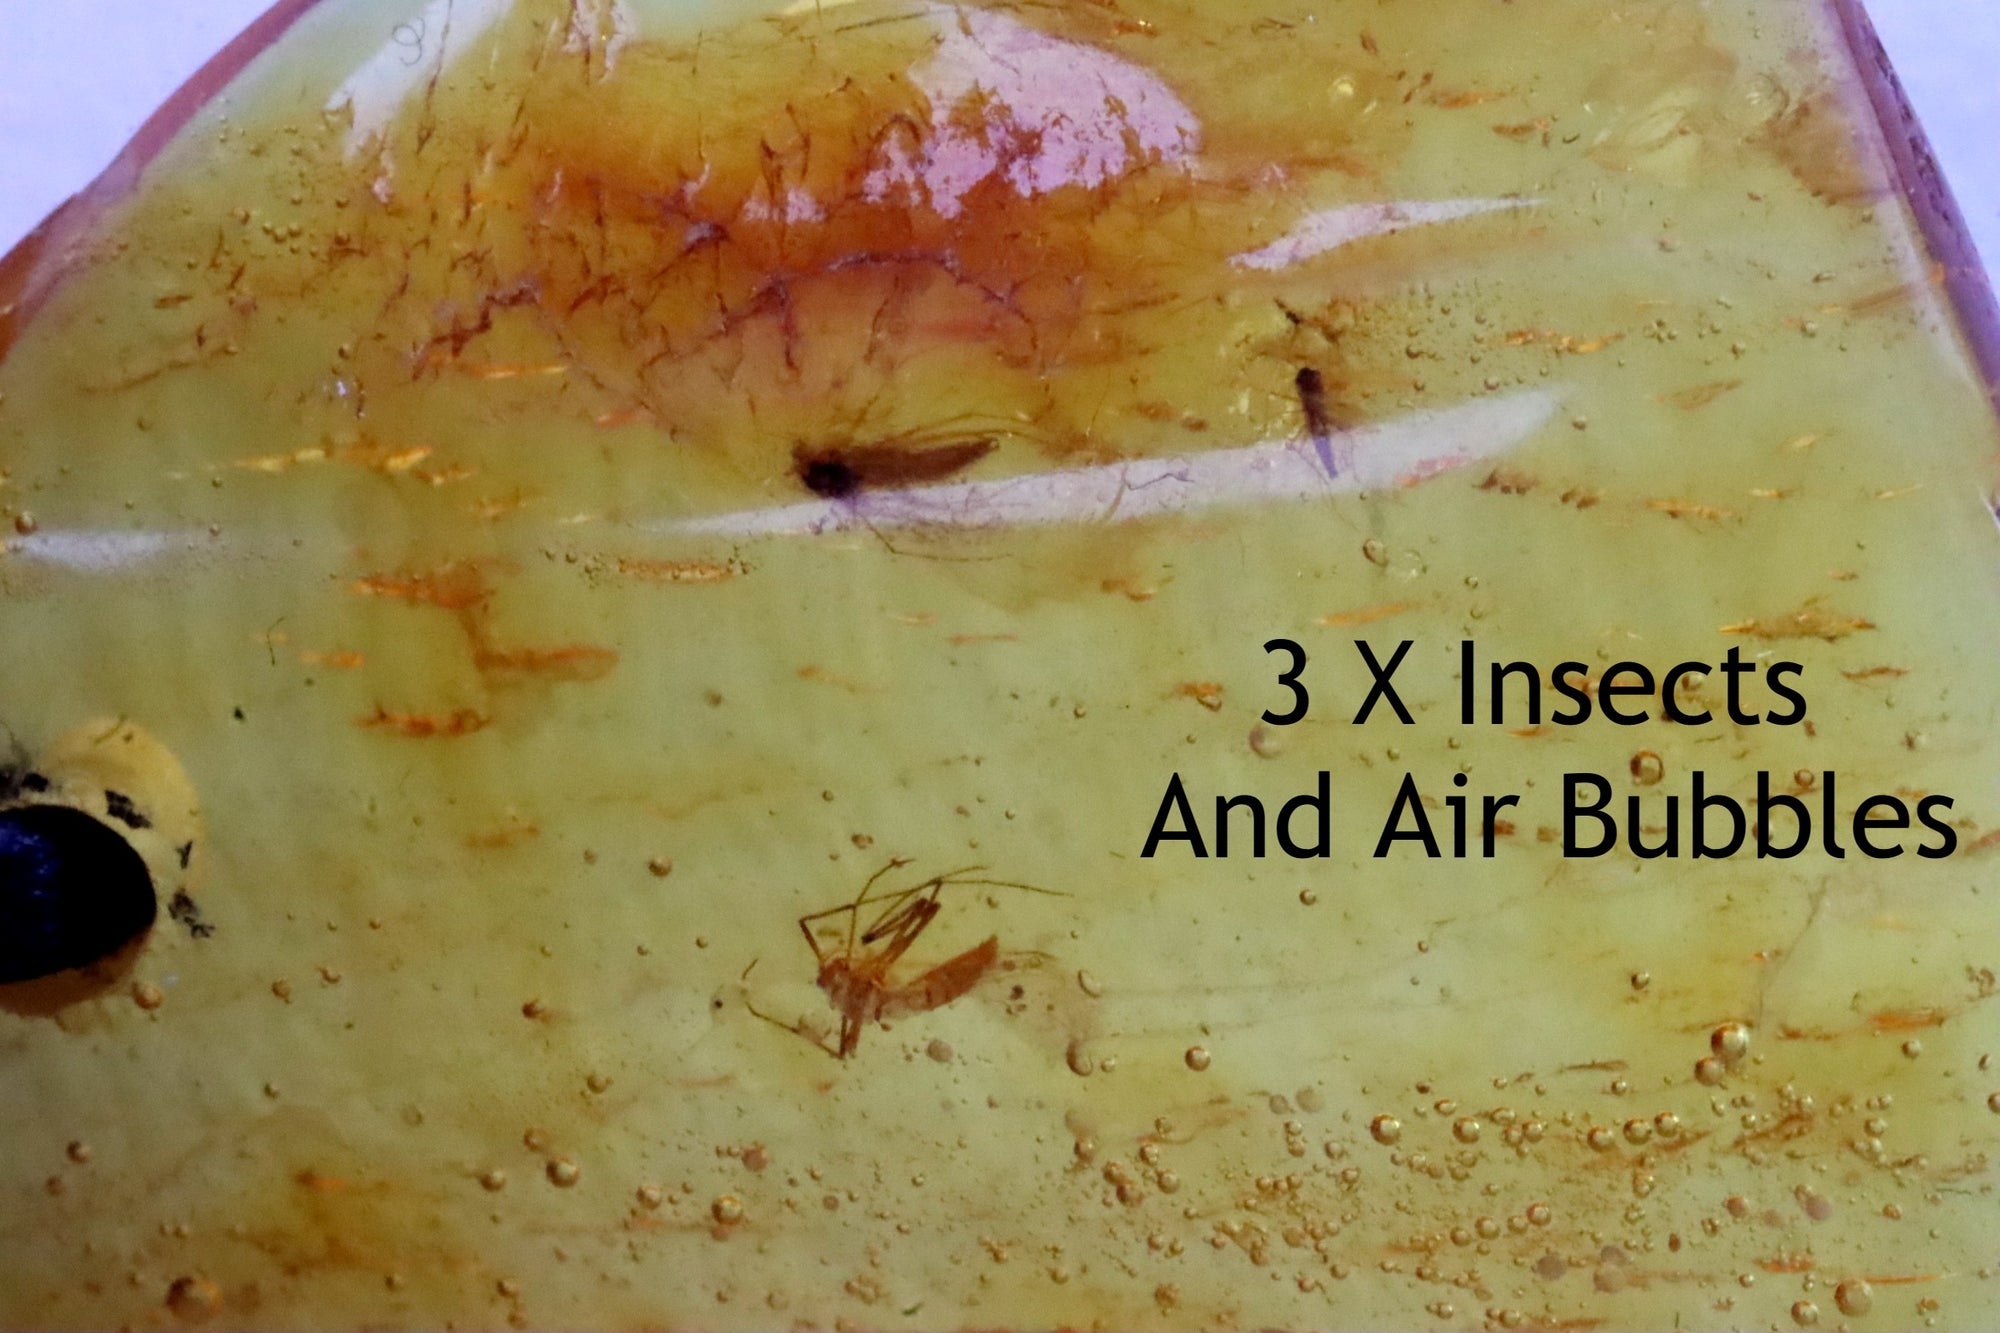 3 X Very Clear Insects In 40 Million Year Old Baltic Amber and air Bubbles